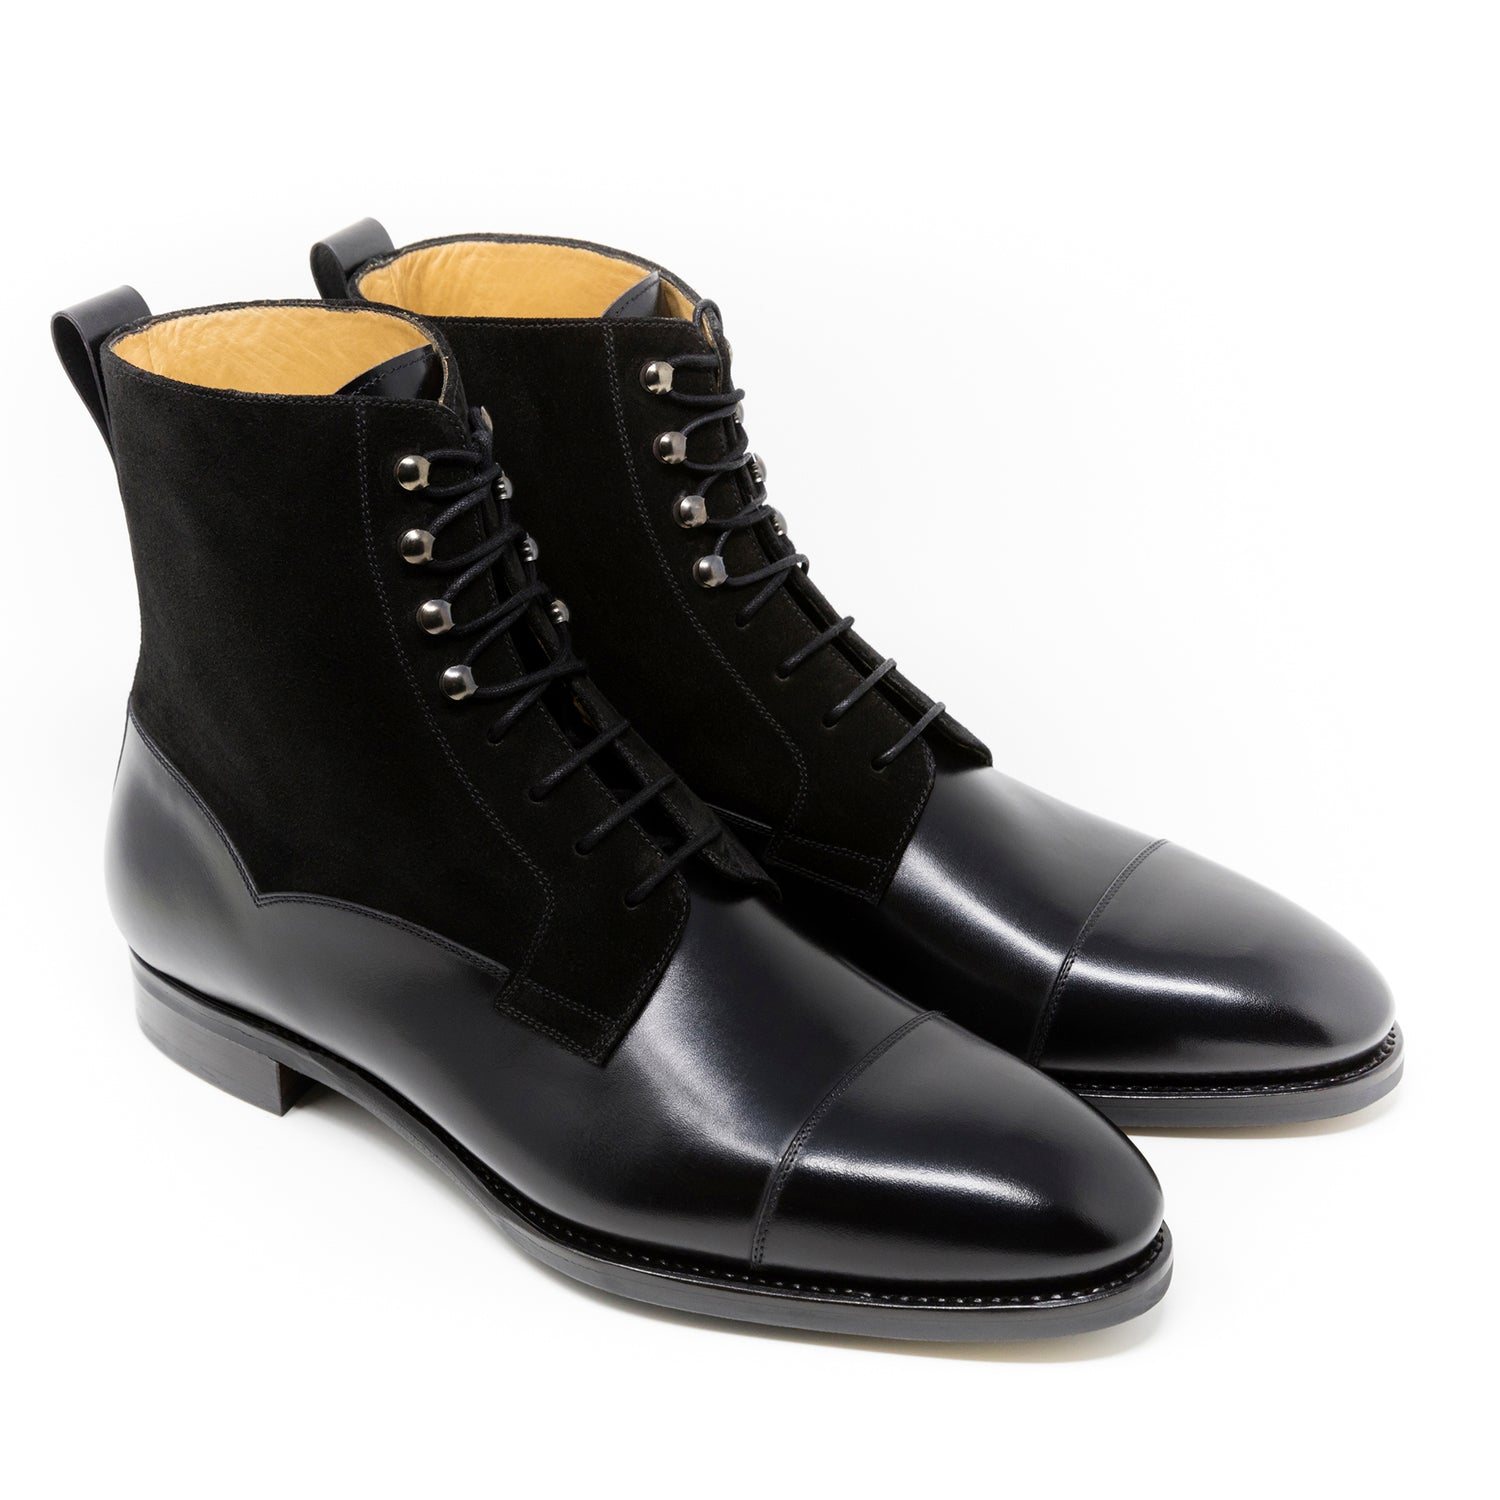 TLB Mallorca leather shoes 140 / GOYA / BOXCALF BLACK & SUEDE BLACK